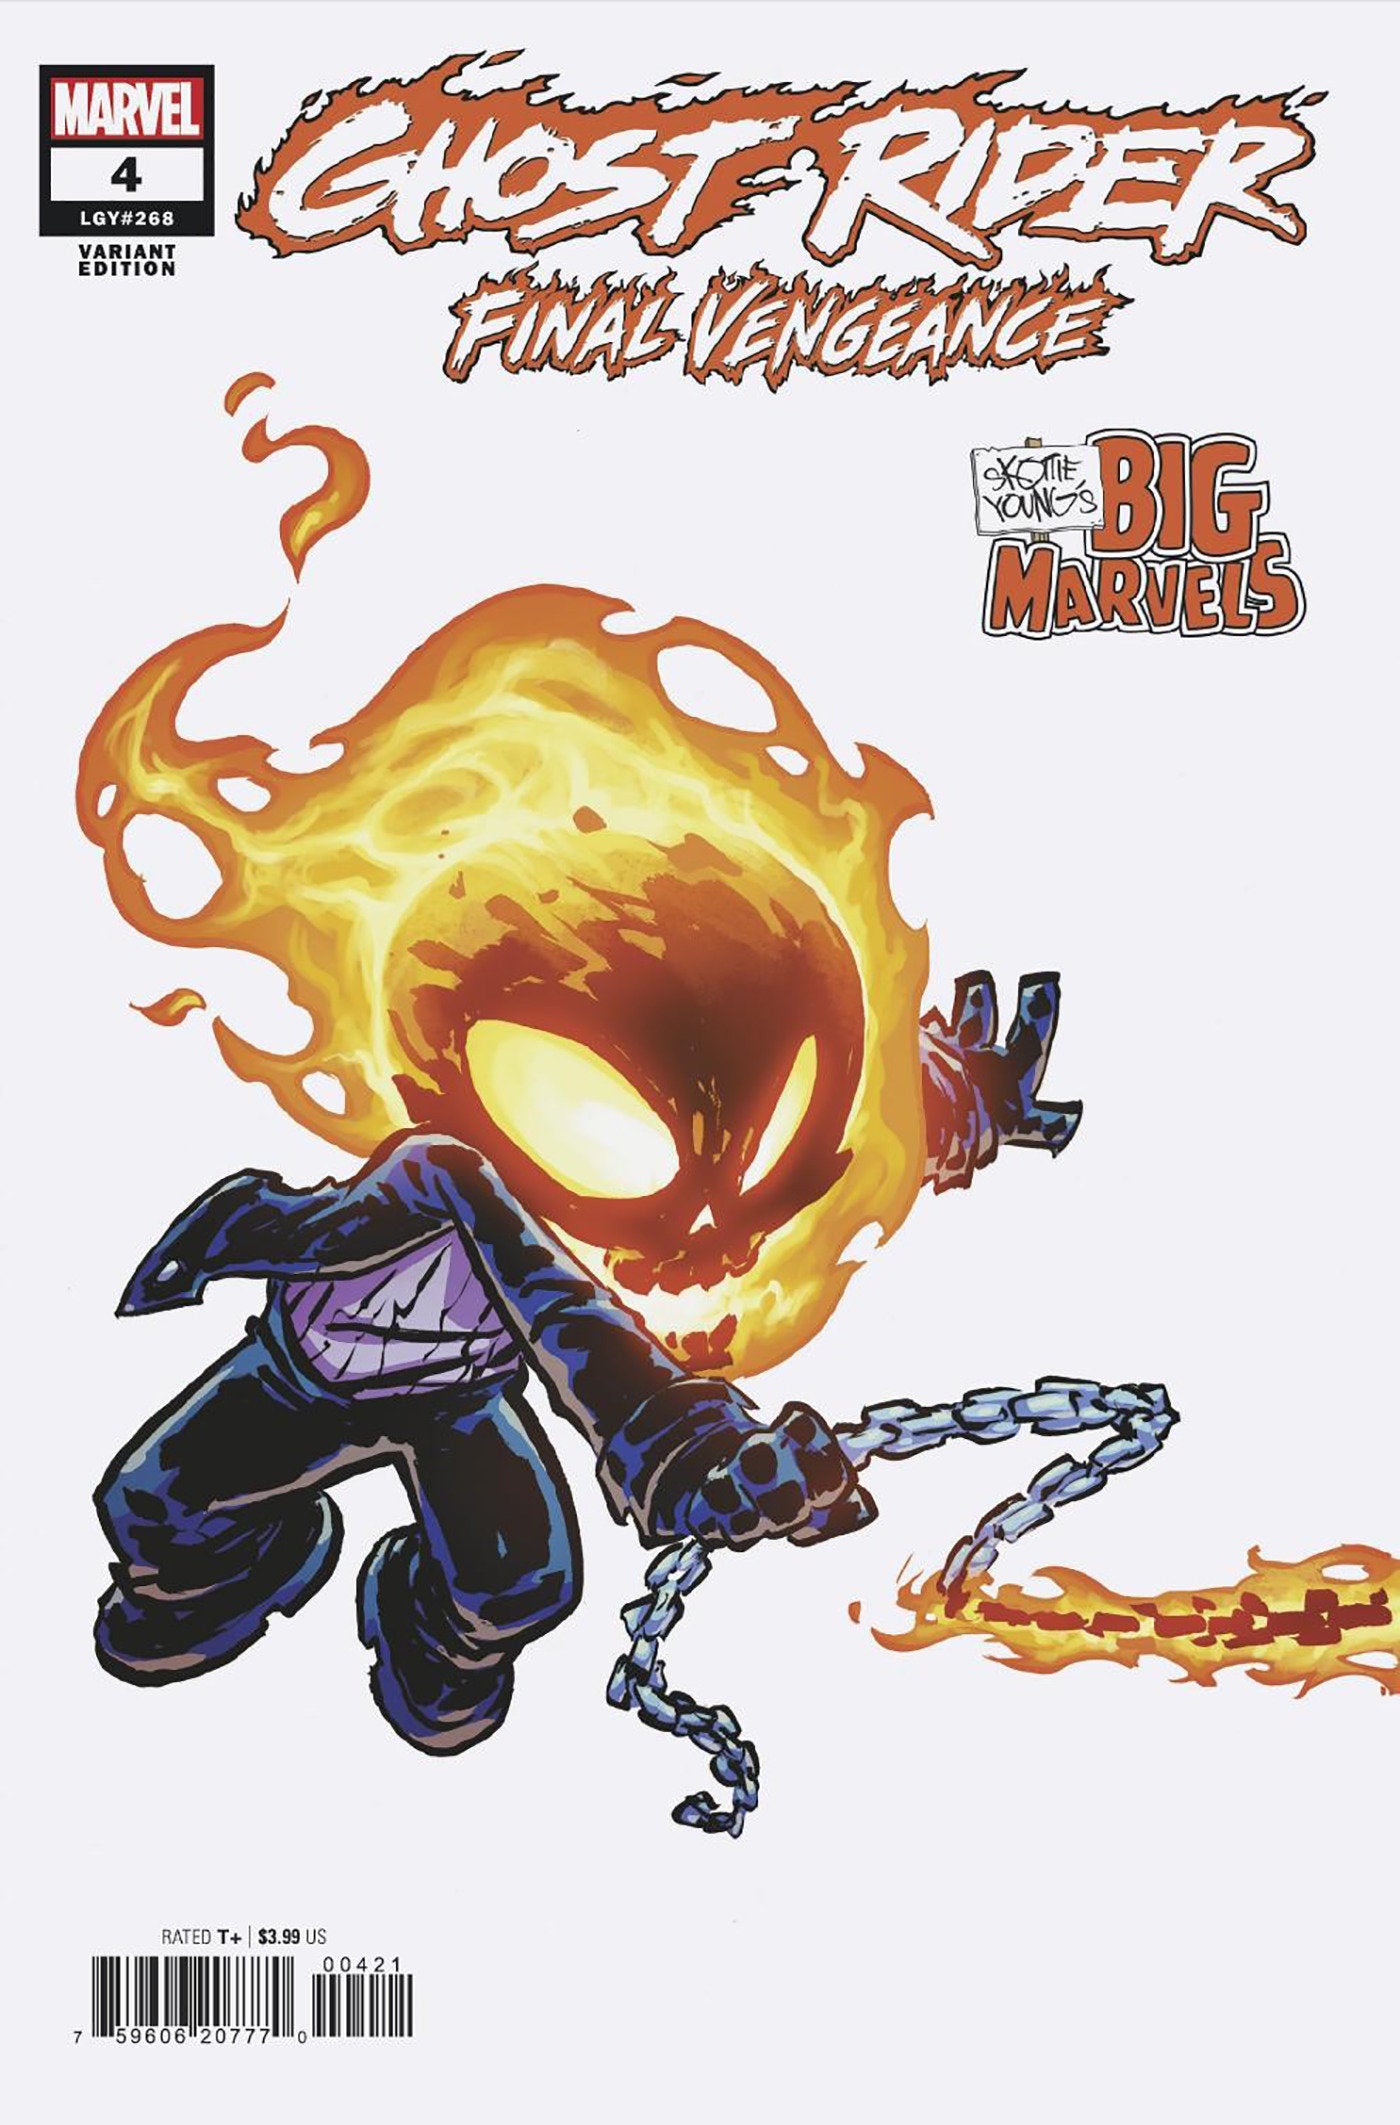 Ghost Rider: Final Vengeance #4 Skottie Young'S Big Marvel Variant | L.A. Mood Comics and Games